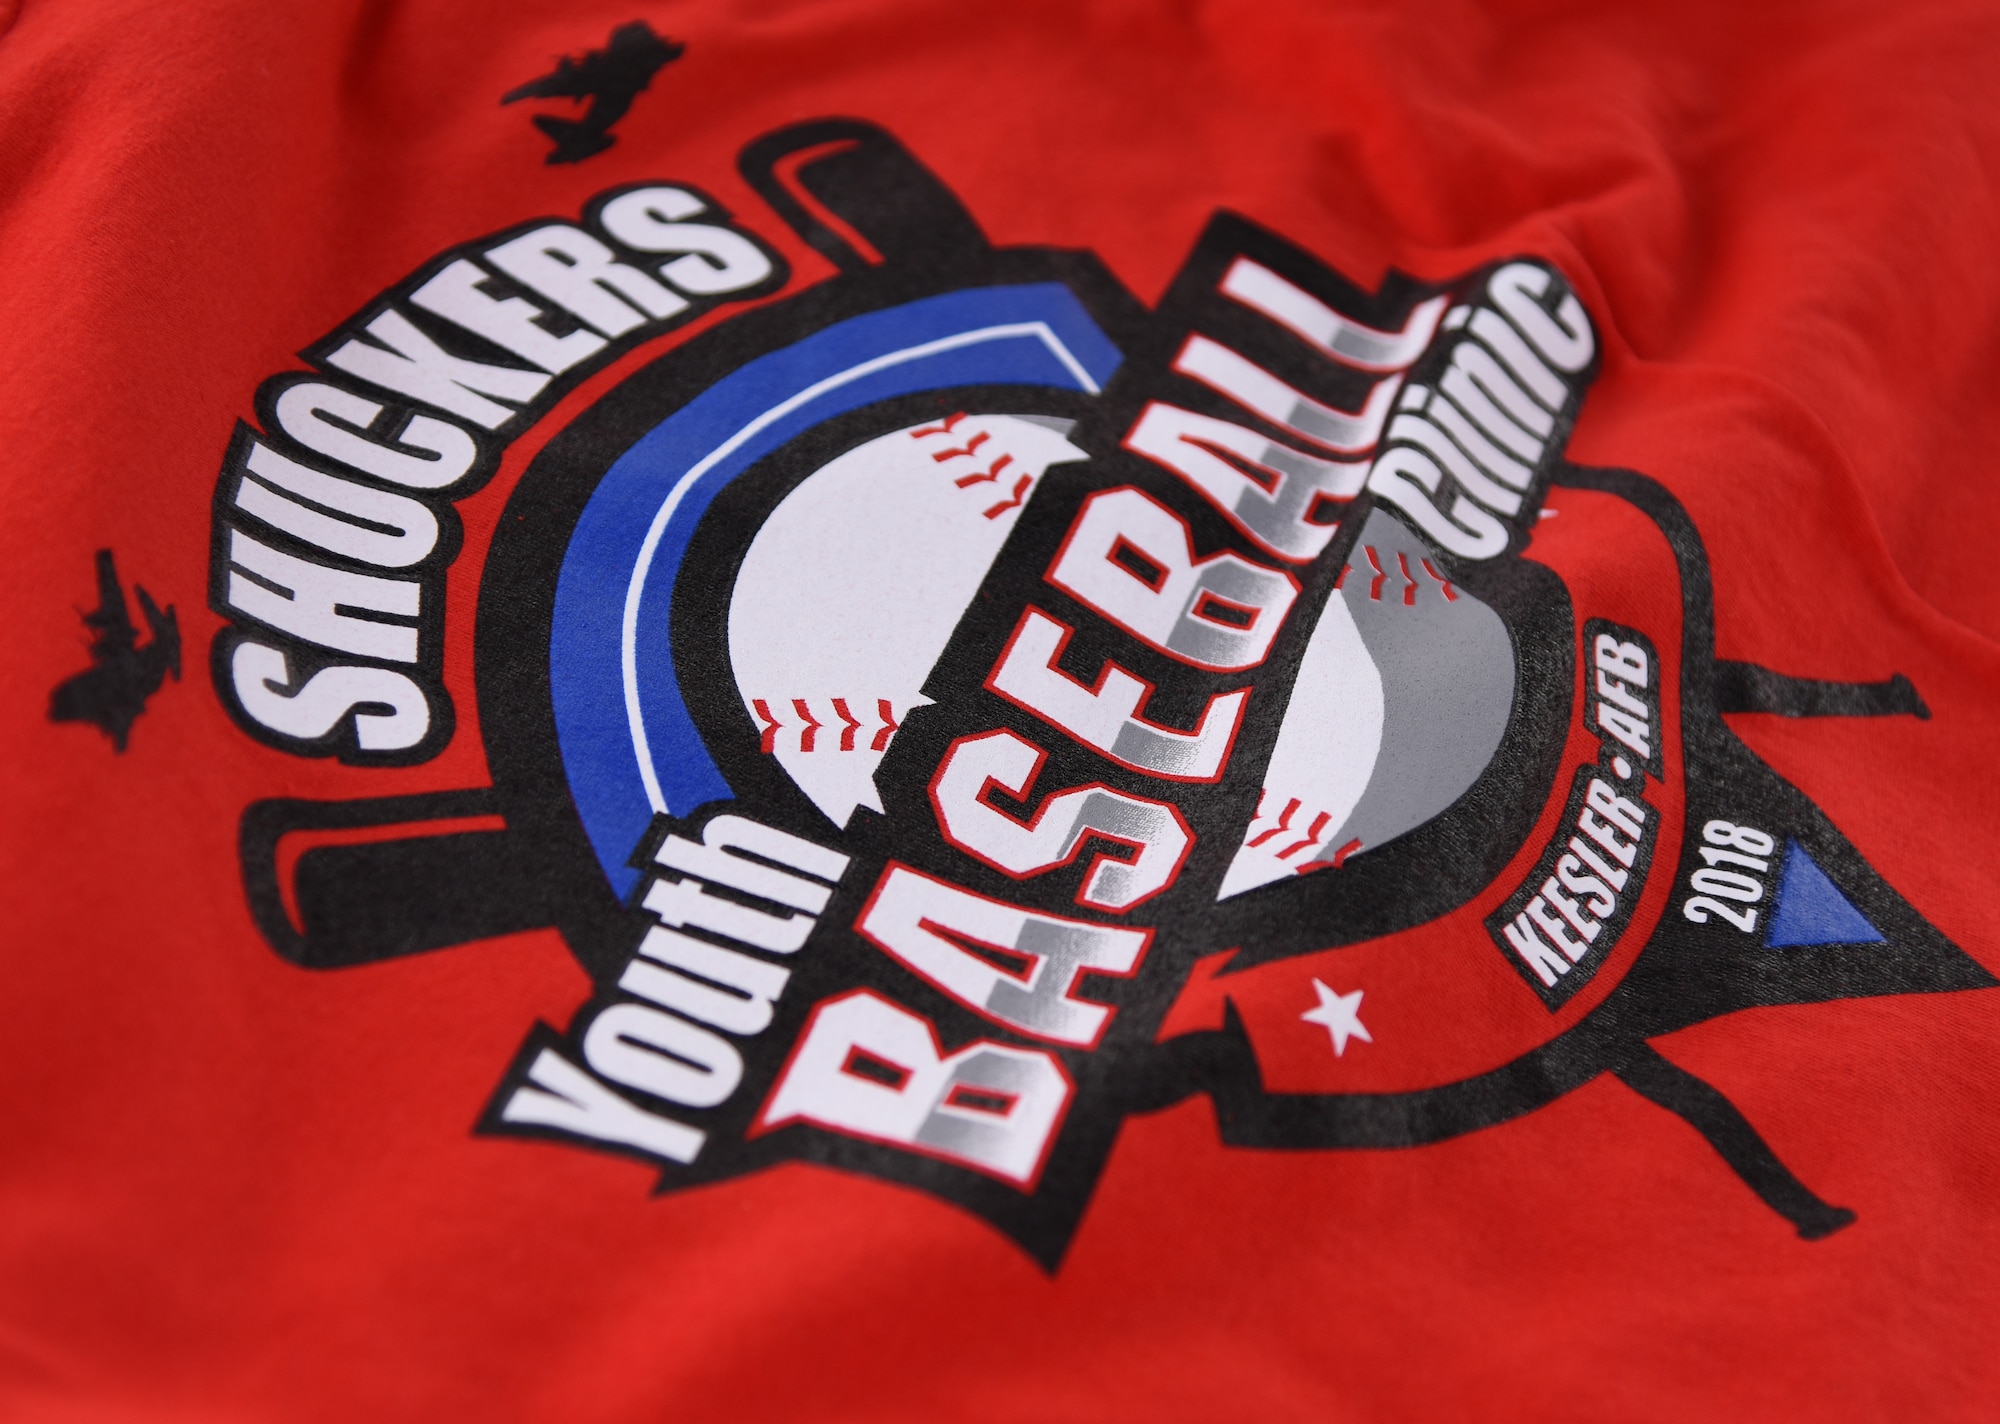 A t-shirt is on display during the Biloxi Shuckers Youth Baseball Clinic on the youth center baseball field at Keesler Air Force Base, Mississippi, May 5, 2018. More than 20 children attended the clinic that provided hitting, pitching, base running and fielding instruction from members of the Biloxi Shuckers minor league baseball team. (U.S. Air Force photo by Kemberly Groue)